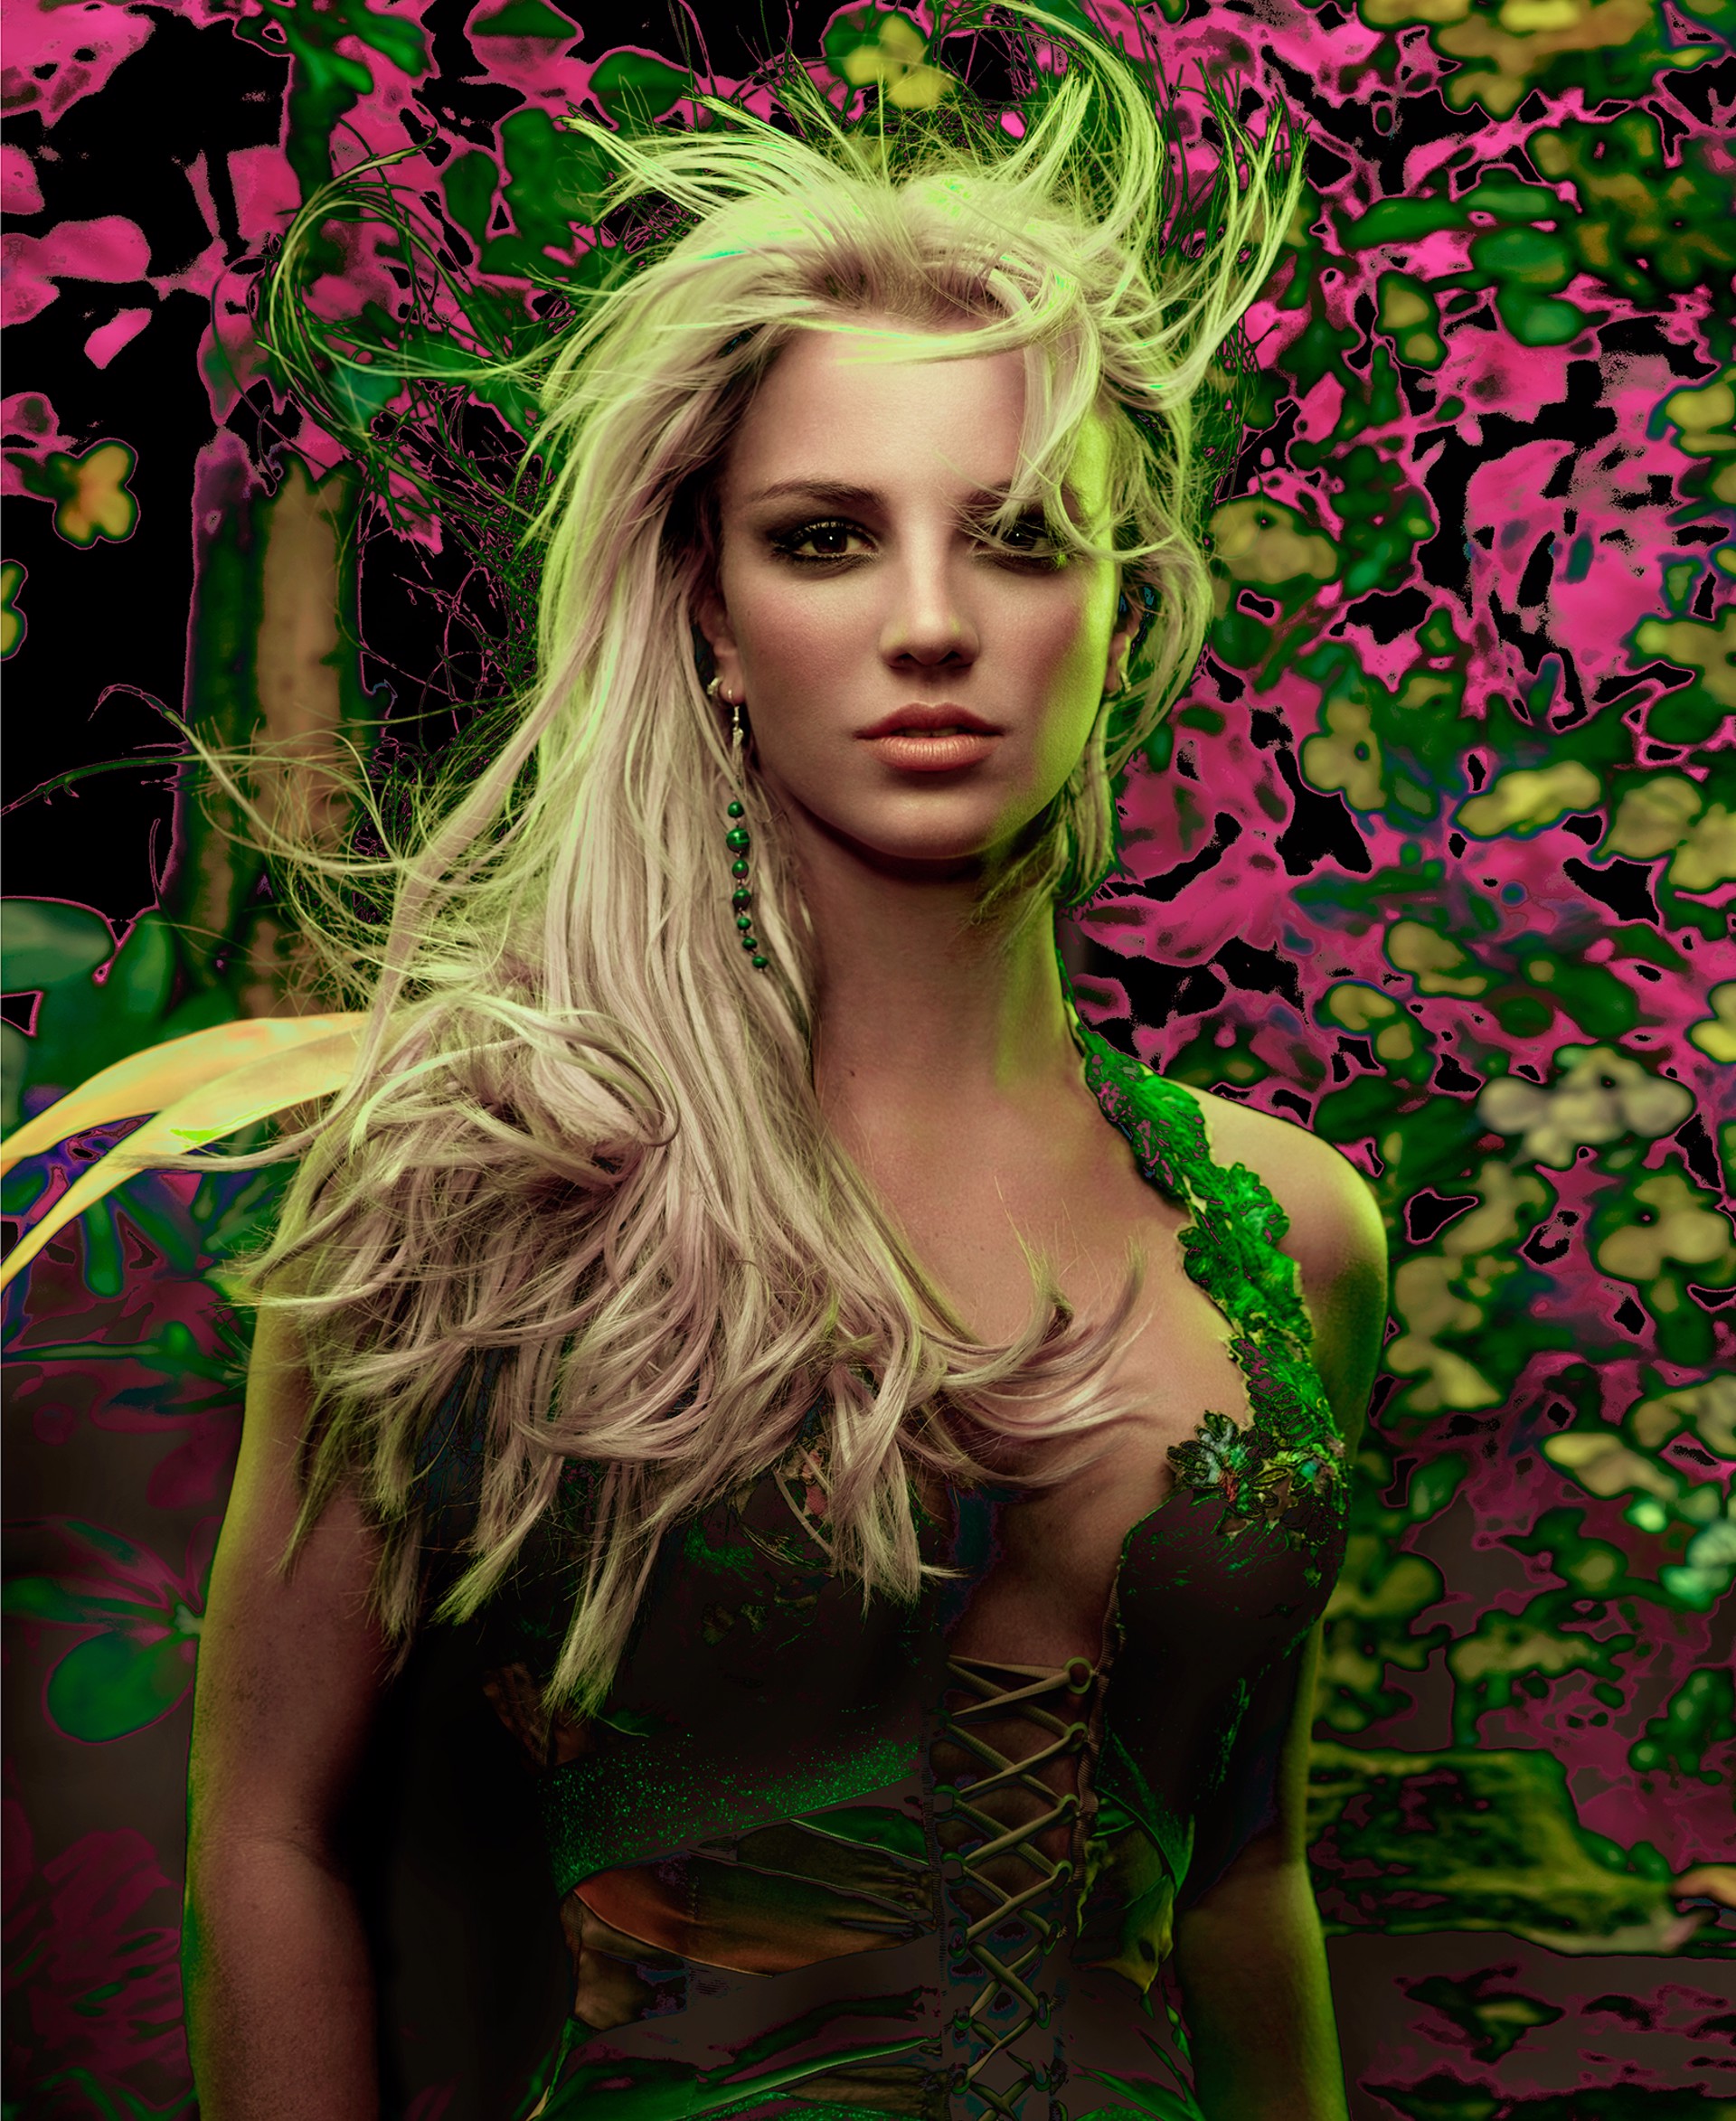 Britney, The Forest (other sizes available upon request) by The White Room Gallery